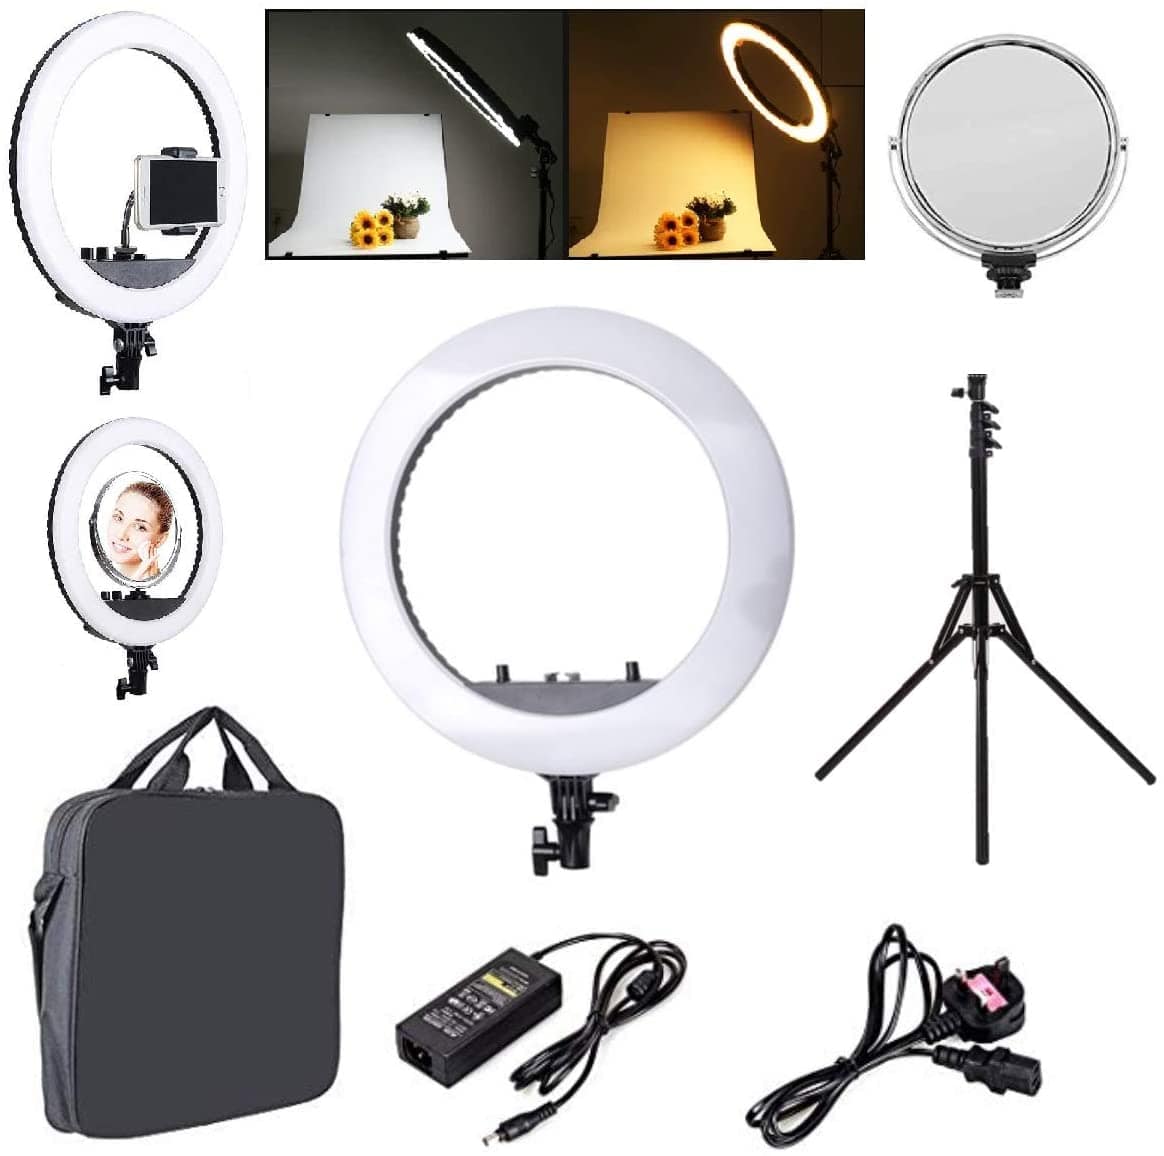 LED Soft Ring Light Kit 18" 55W Dimmable 3200K-6000K with Tripod Stand, Cell Phone Holder, Carrying Bag, Mirror